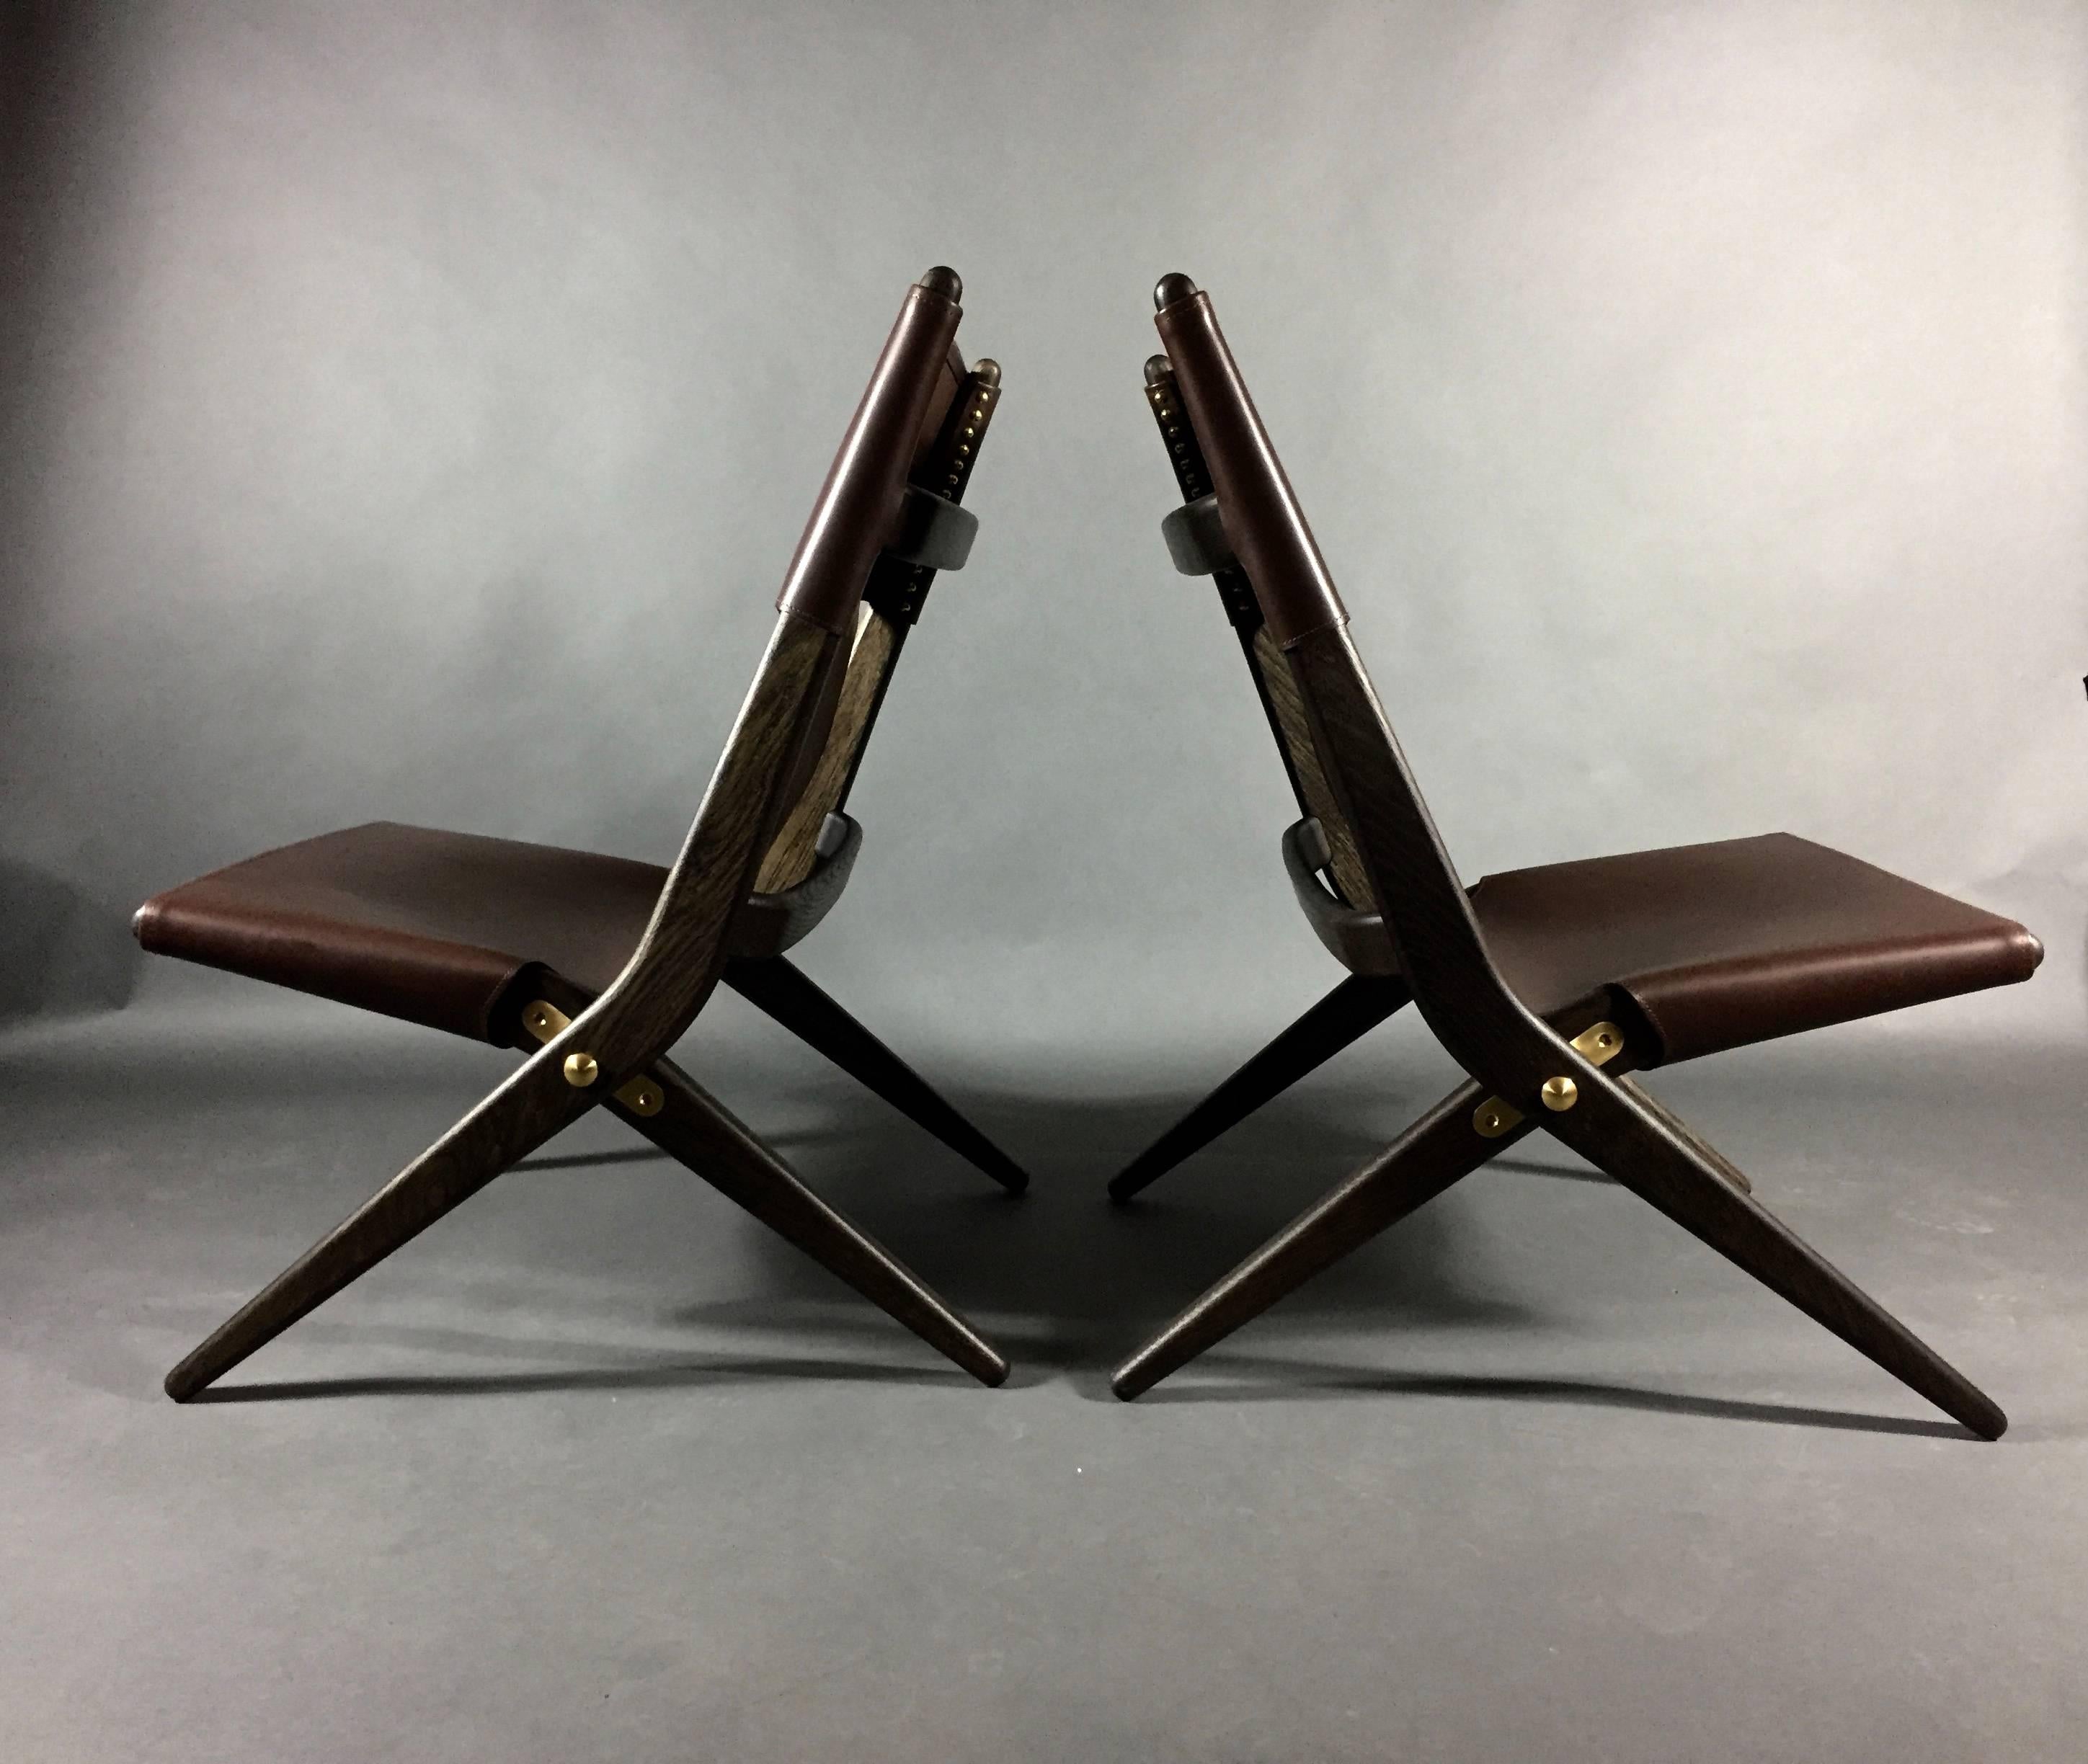 Designed by visionary architect Mogens Lassen for The Copenhagen Cabinetmakers’ Guild Competition in 1955 - and inspired by the Bauhaus era. Originally produced by master joiner A.J. Iverson, Denmark. This recently manufactured folding chair is made